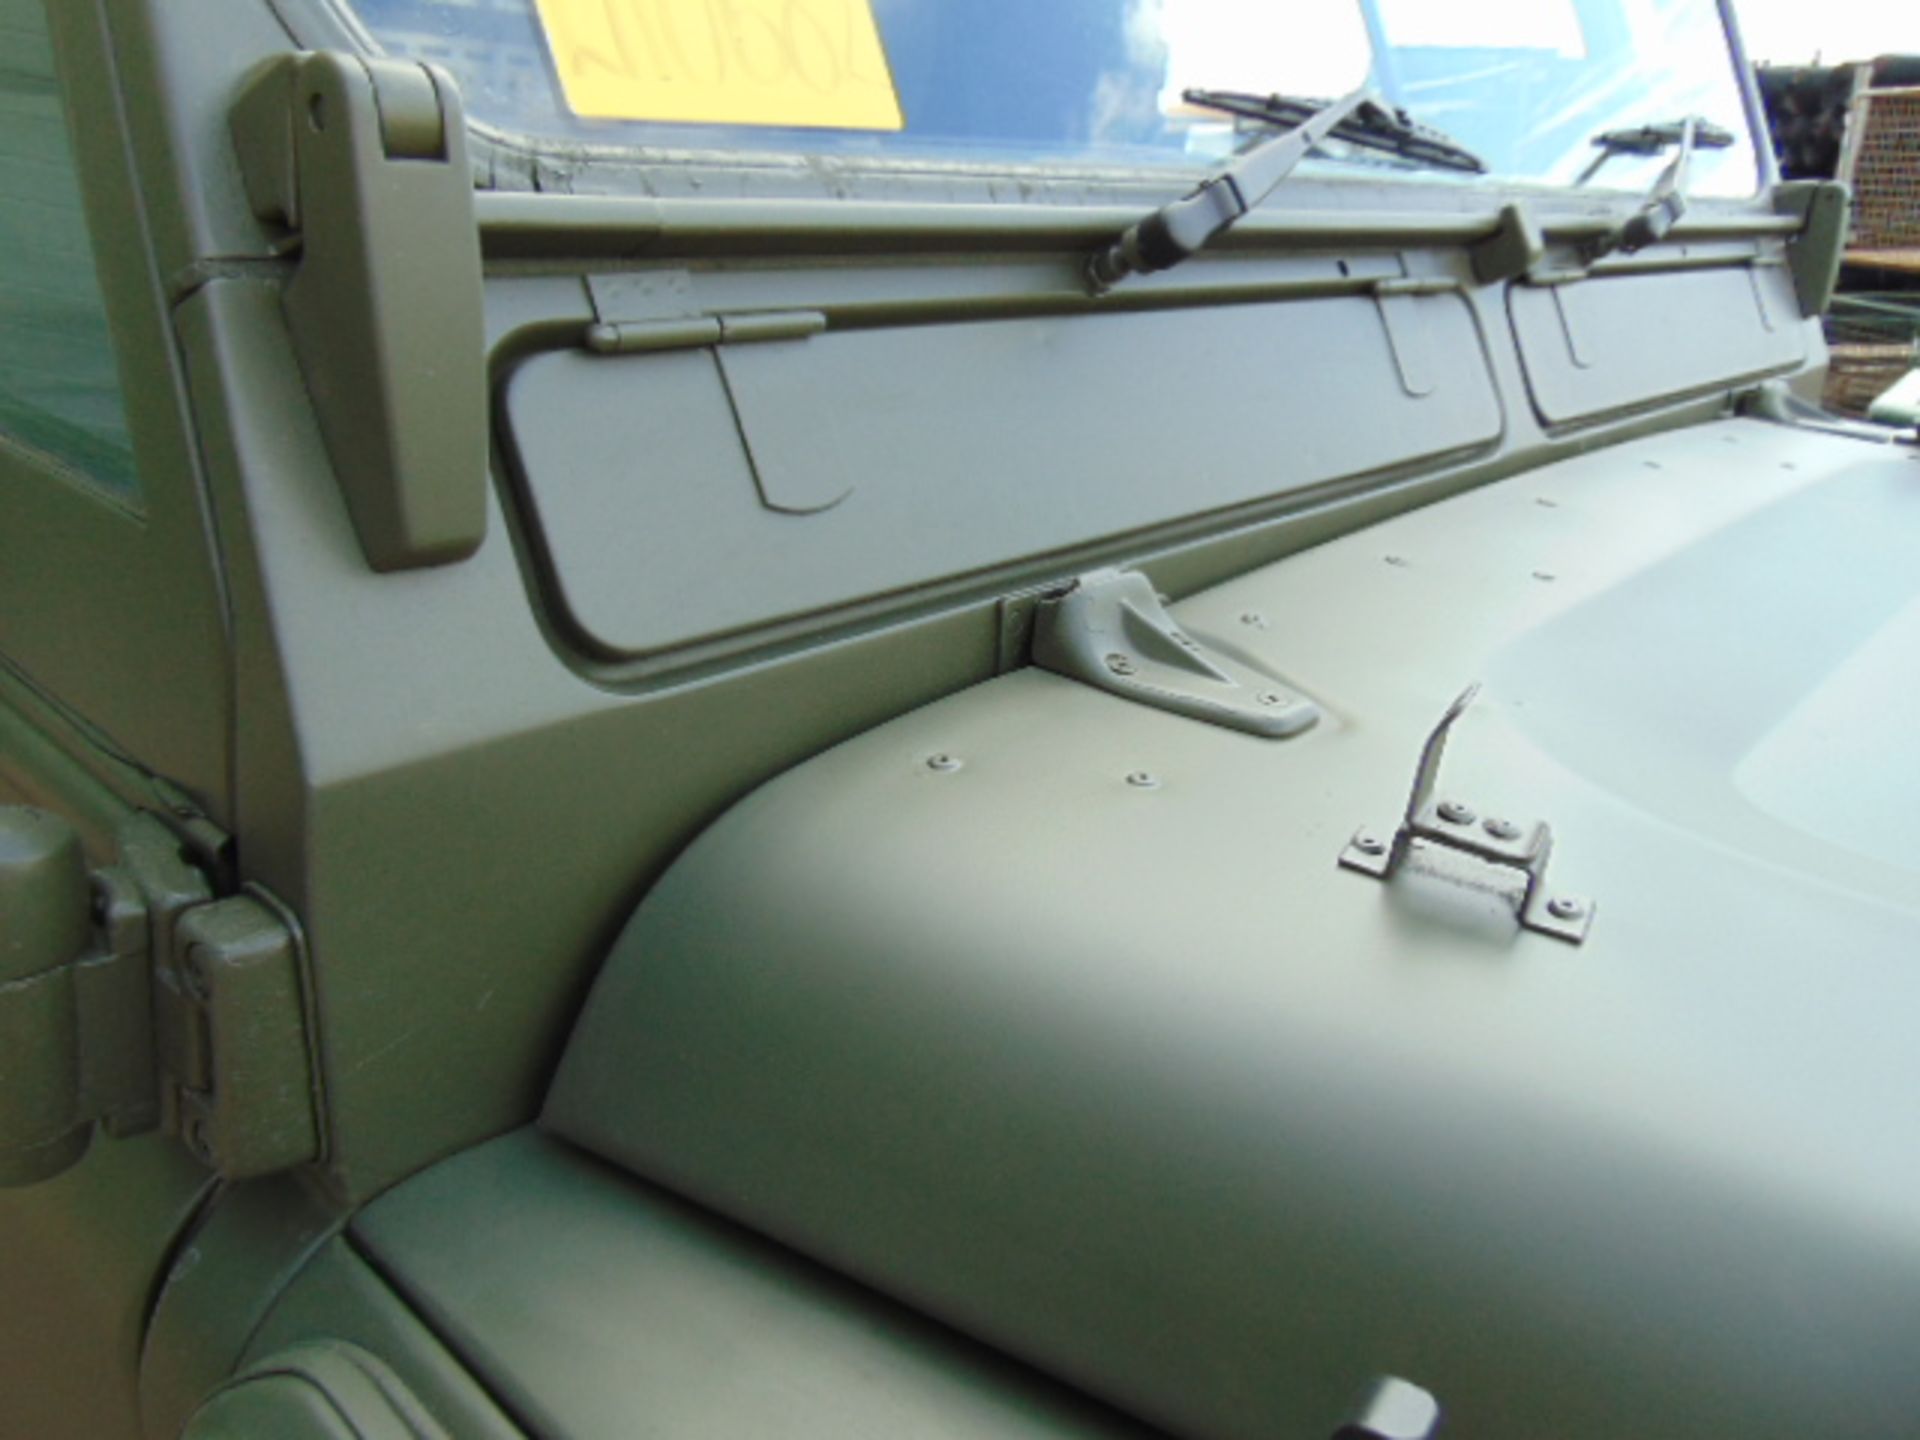 1998 Land Rover Wolf 110 Hard Top with Remus upgrade - Image 10 of 32